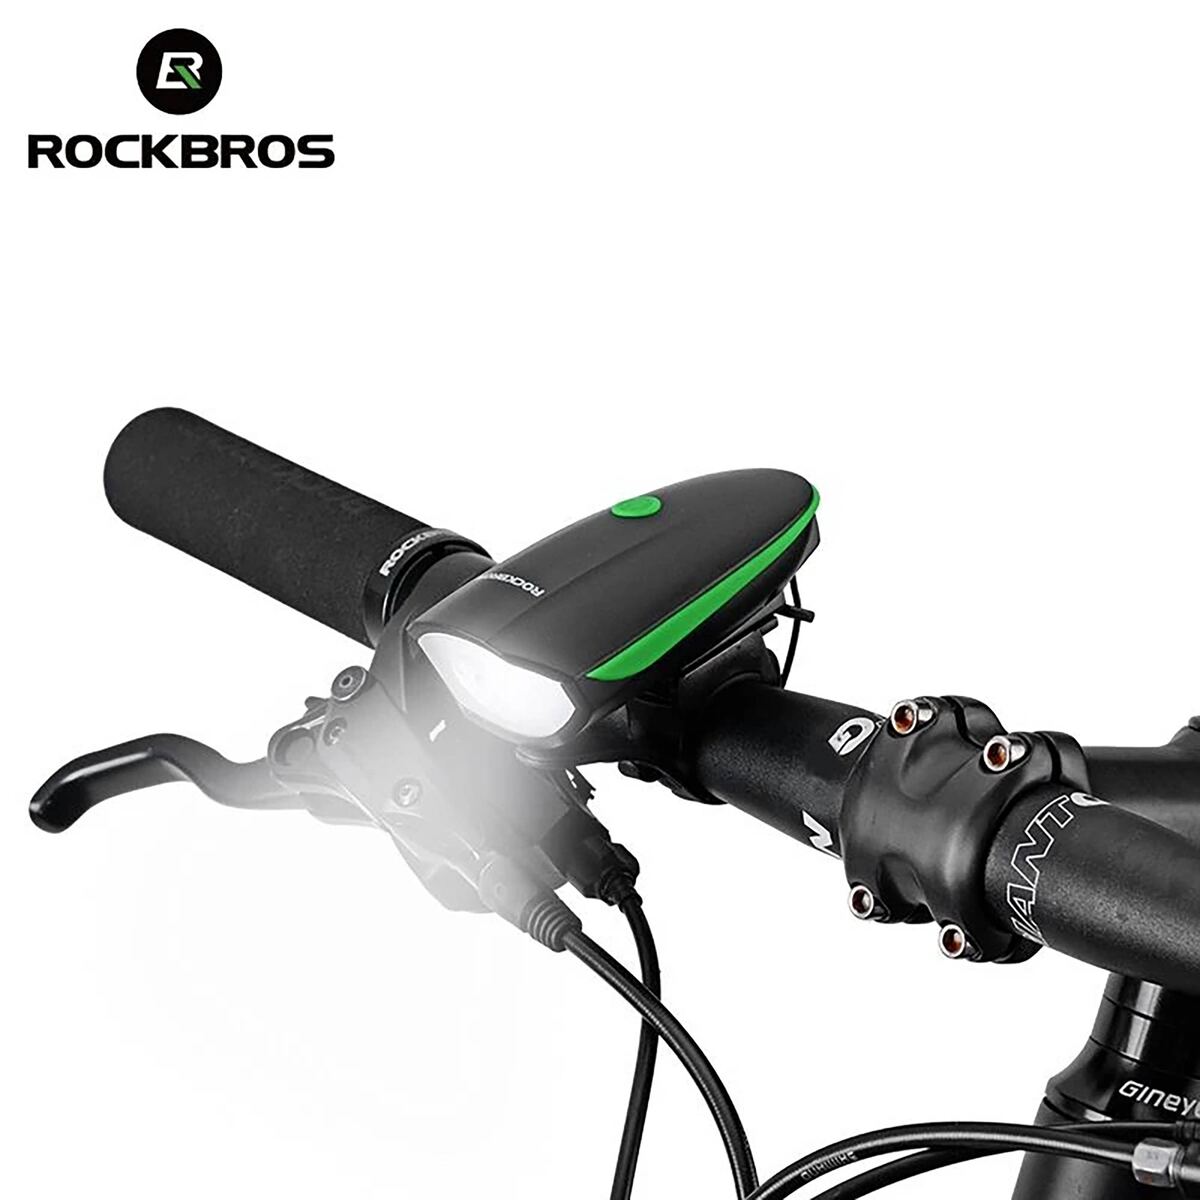 ROCKBROS Bicycle Rechargeable Light with Horn 7588-G Black Green